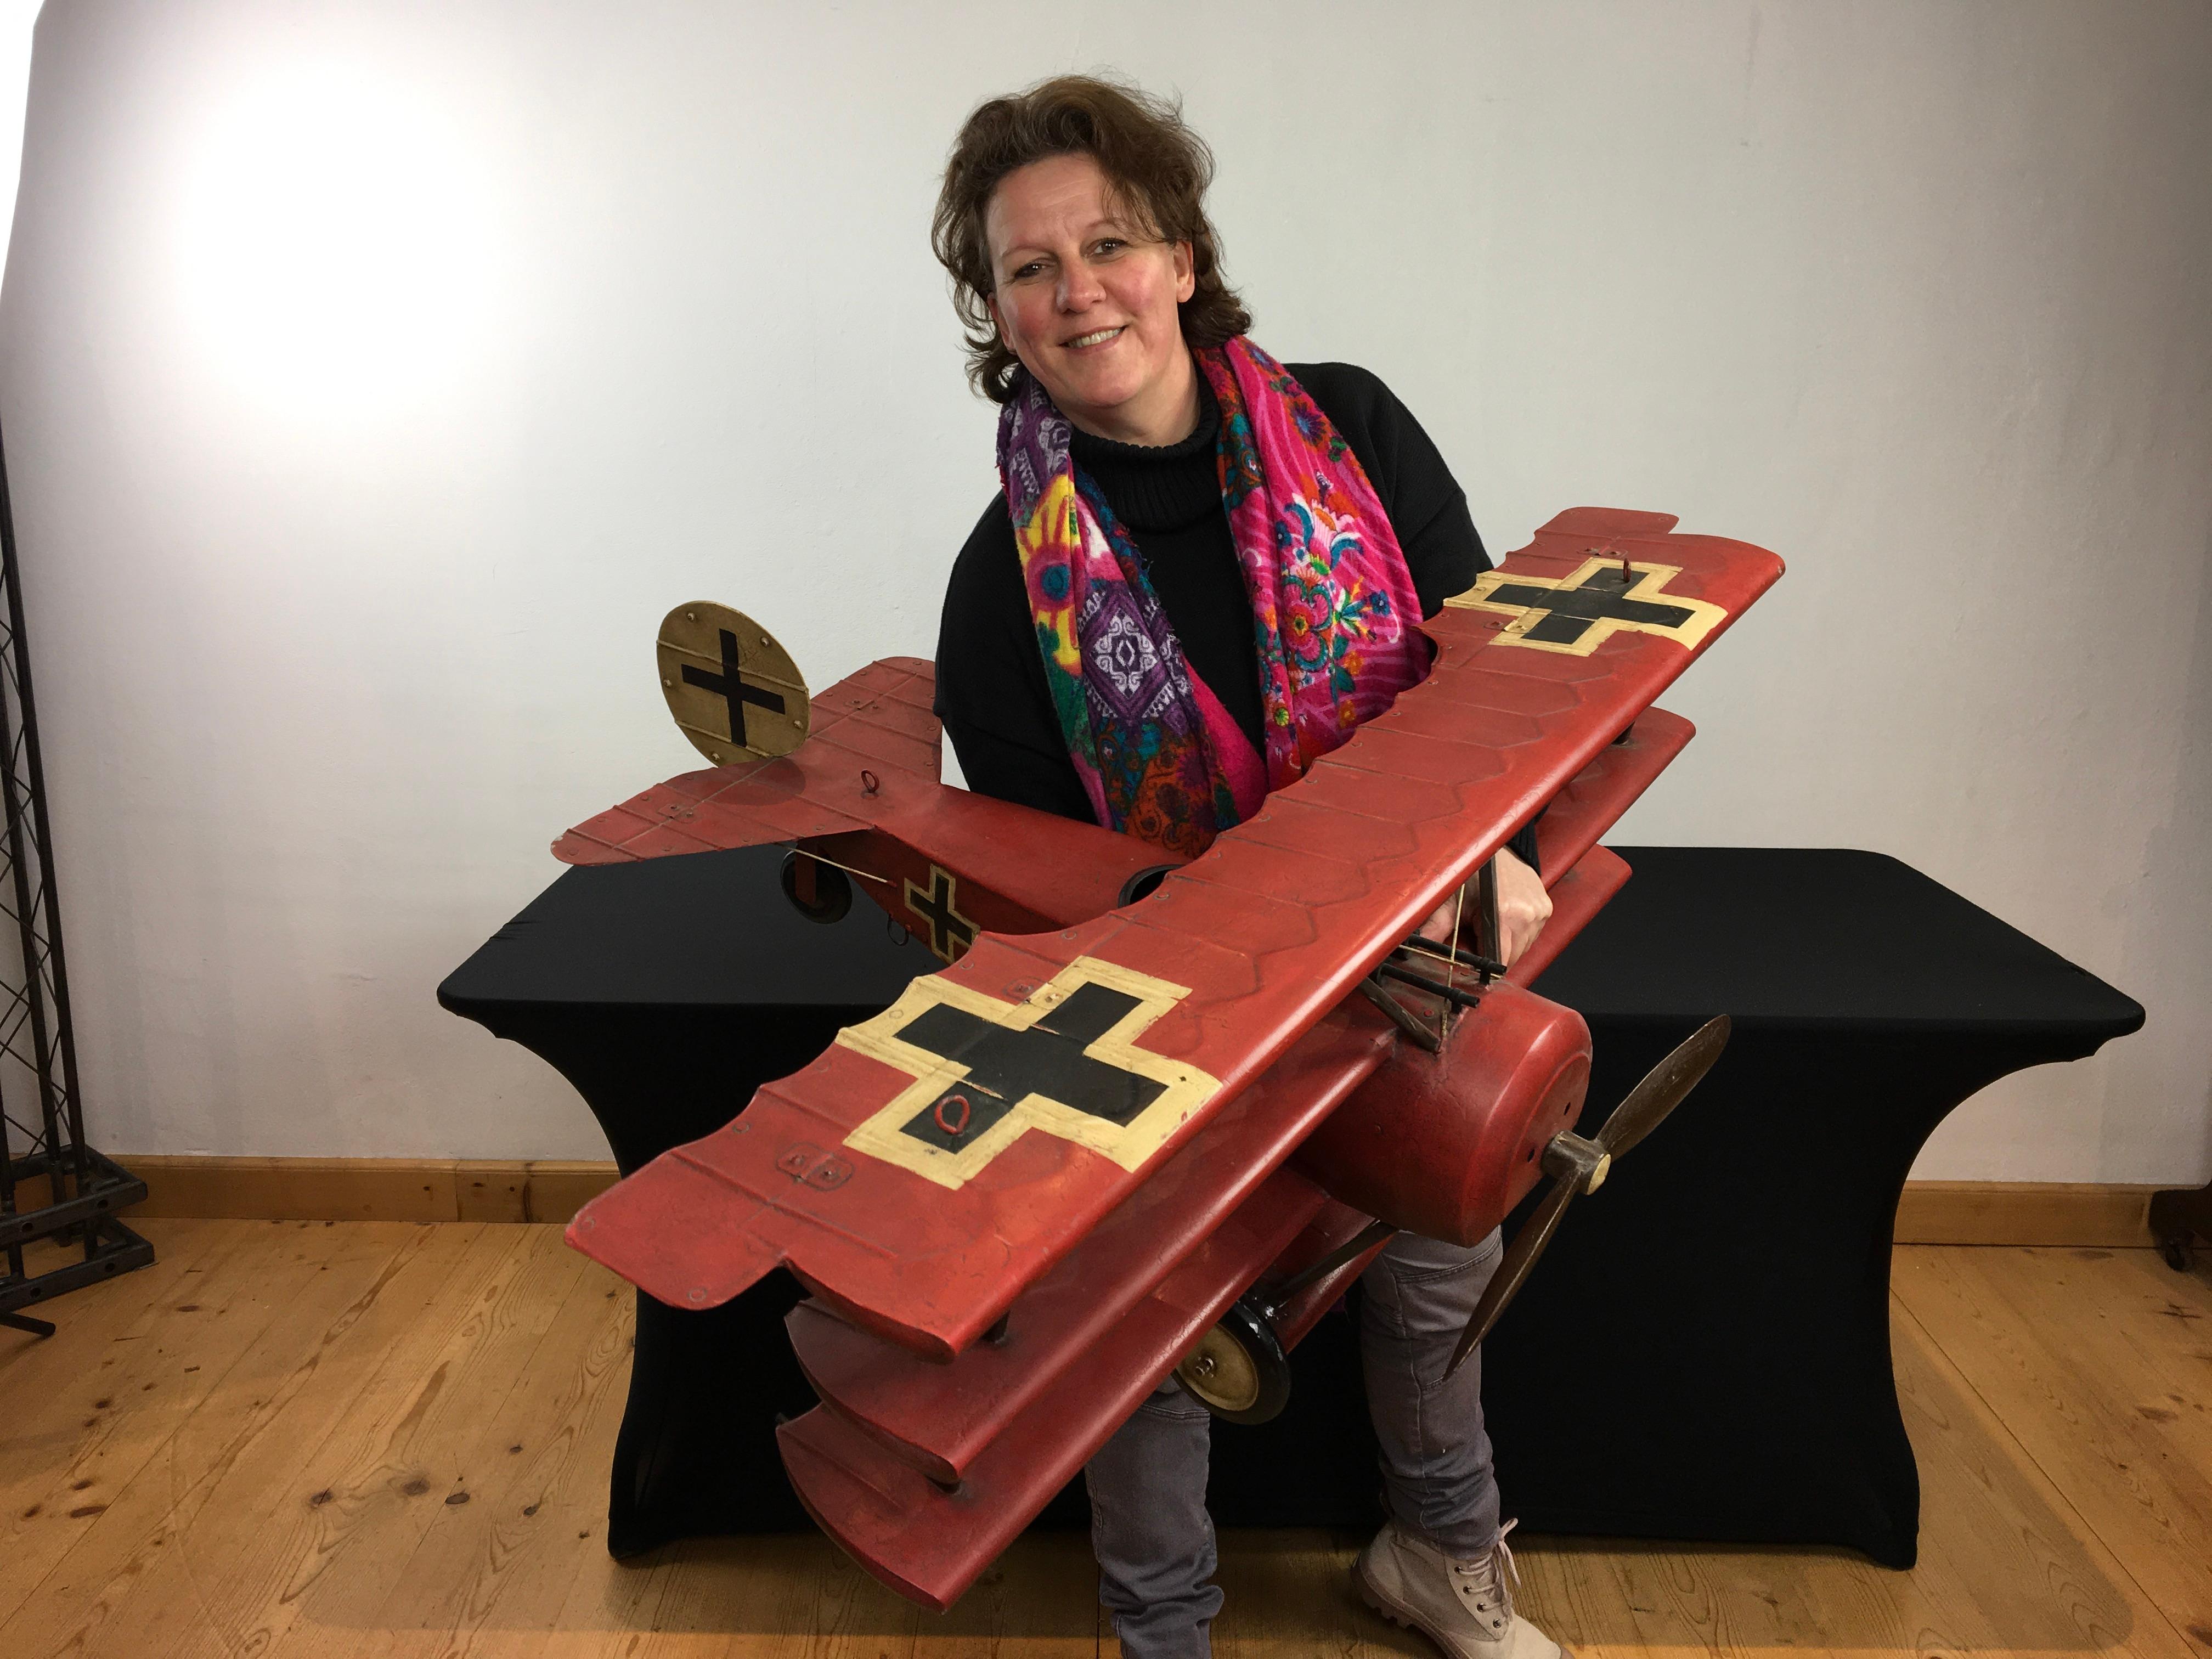 Old Red Baron tri - plane model. 
A large red metal fokker plane with a wingspan of 46.26 inch or 117.5 cm 

The Fokker Triplane, was a World War I fighter plane. 
Manfred von Richthofen, the famed Red Baron, first flew the Fokker plane.